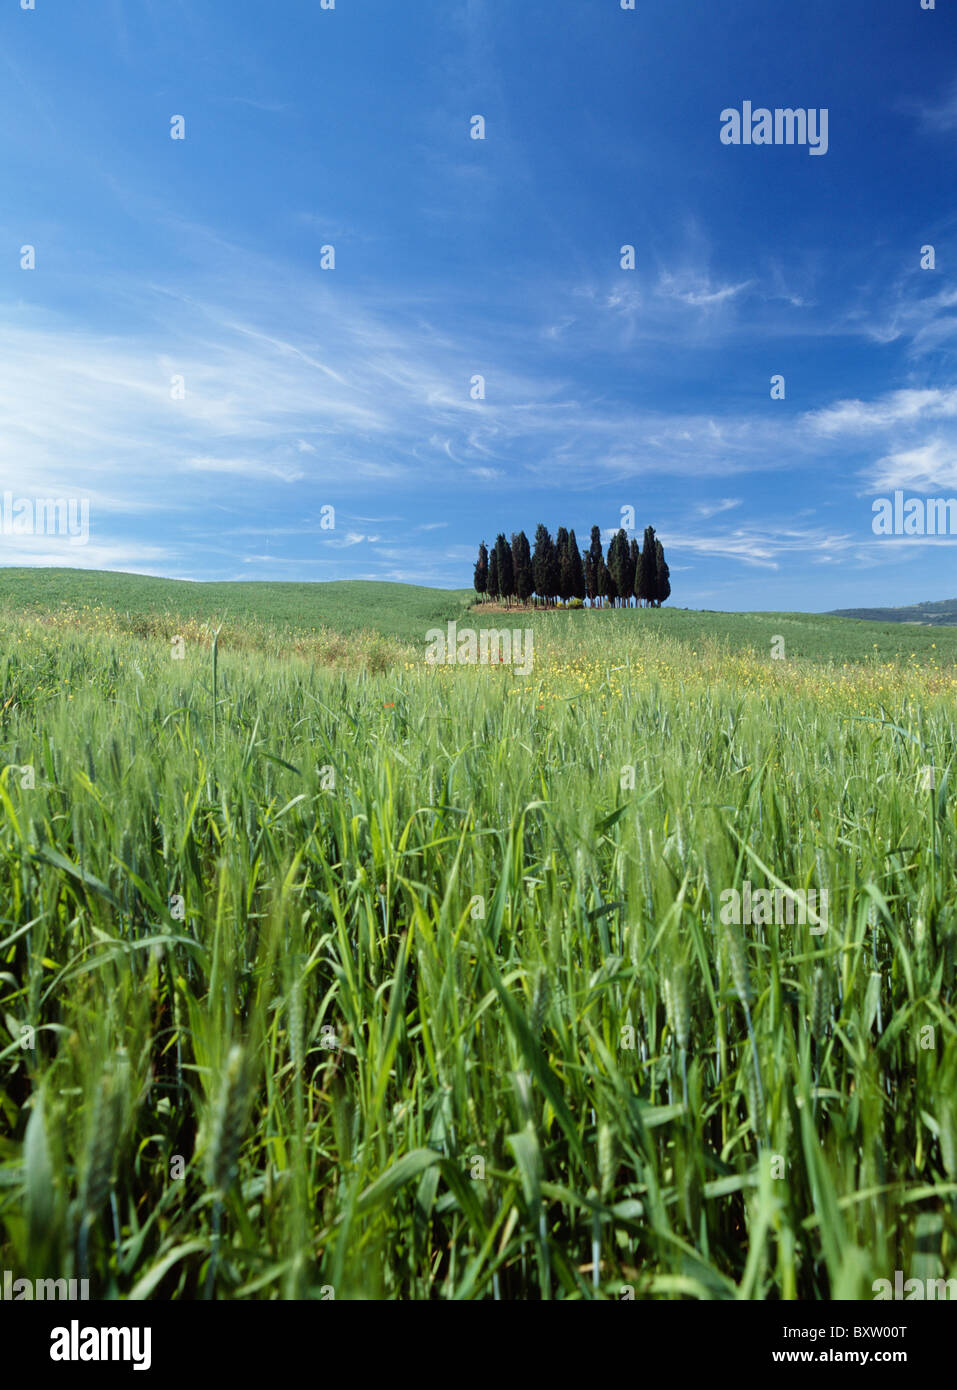 Group Of Trees In Wheat Fields Stock Photo